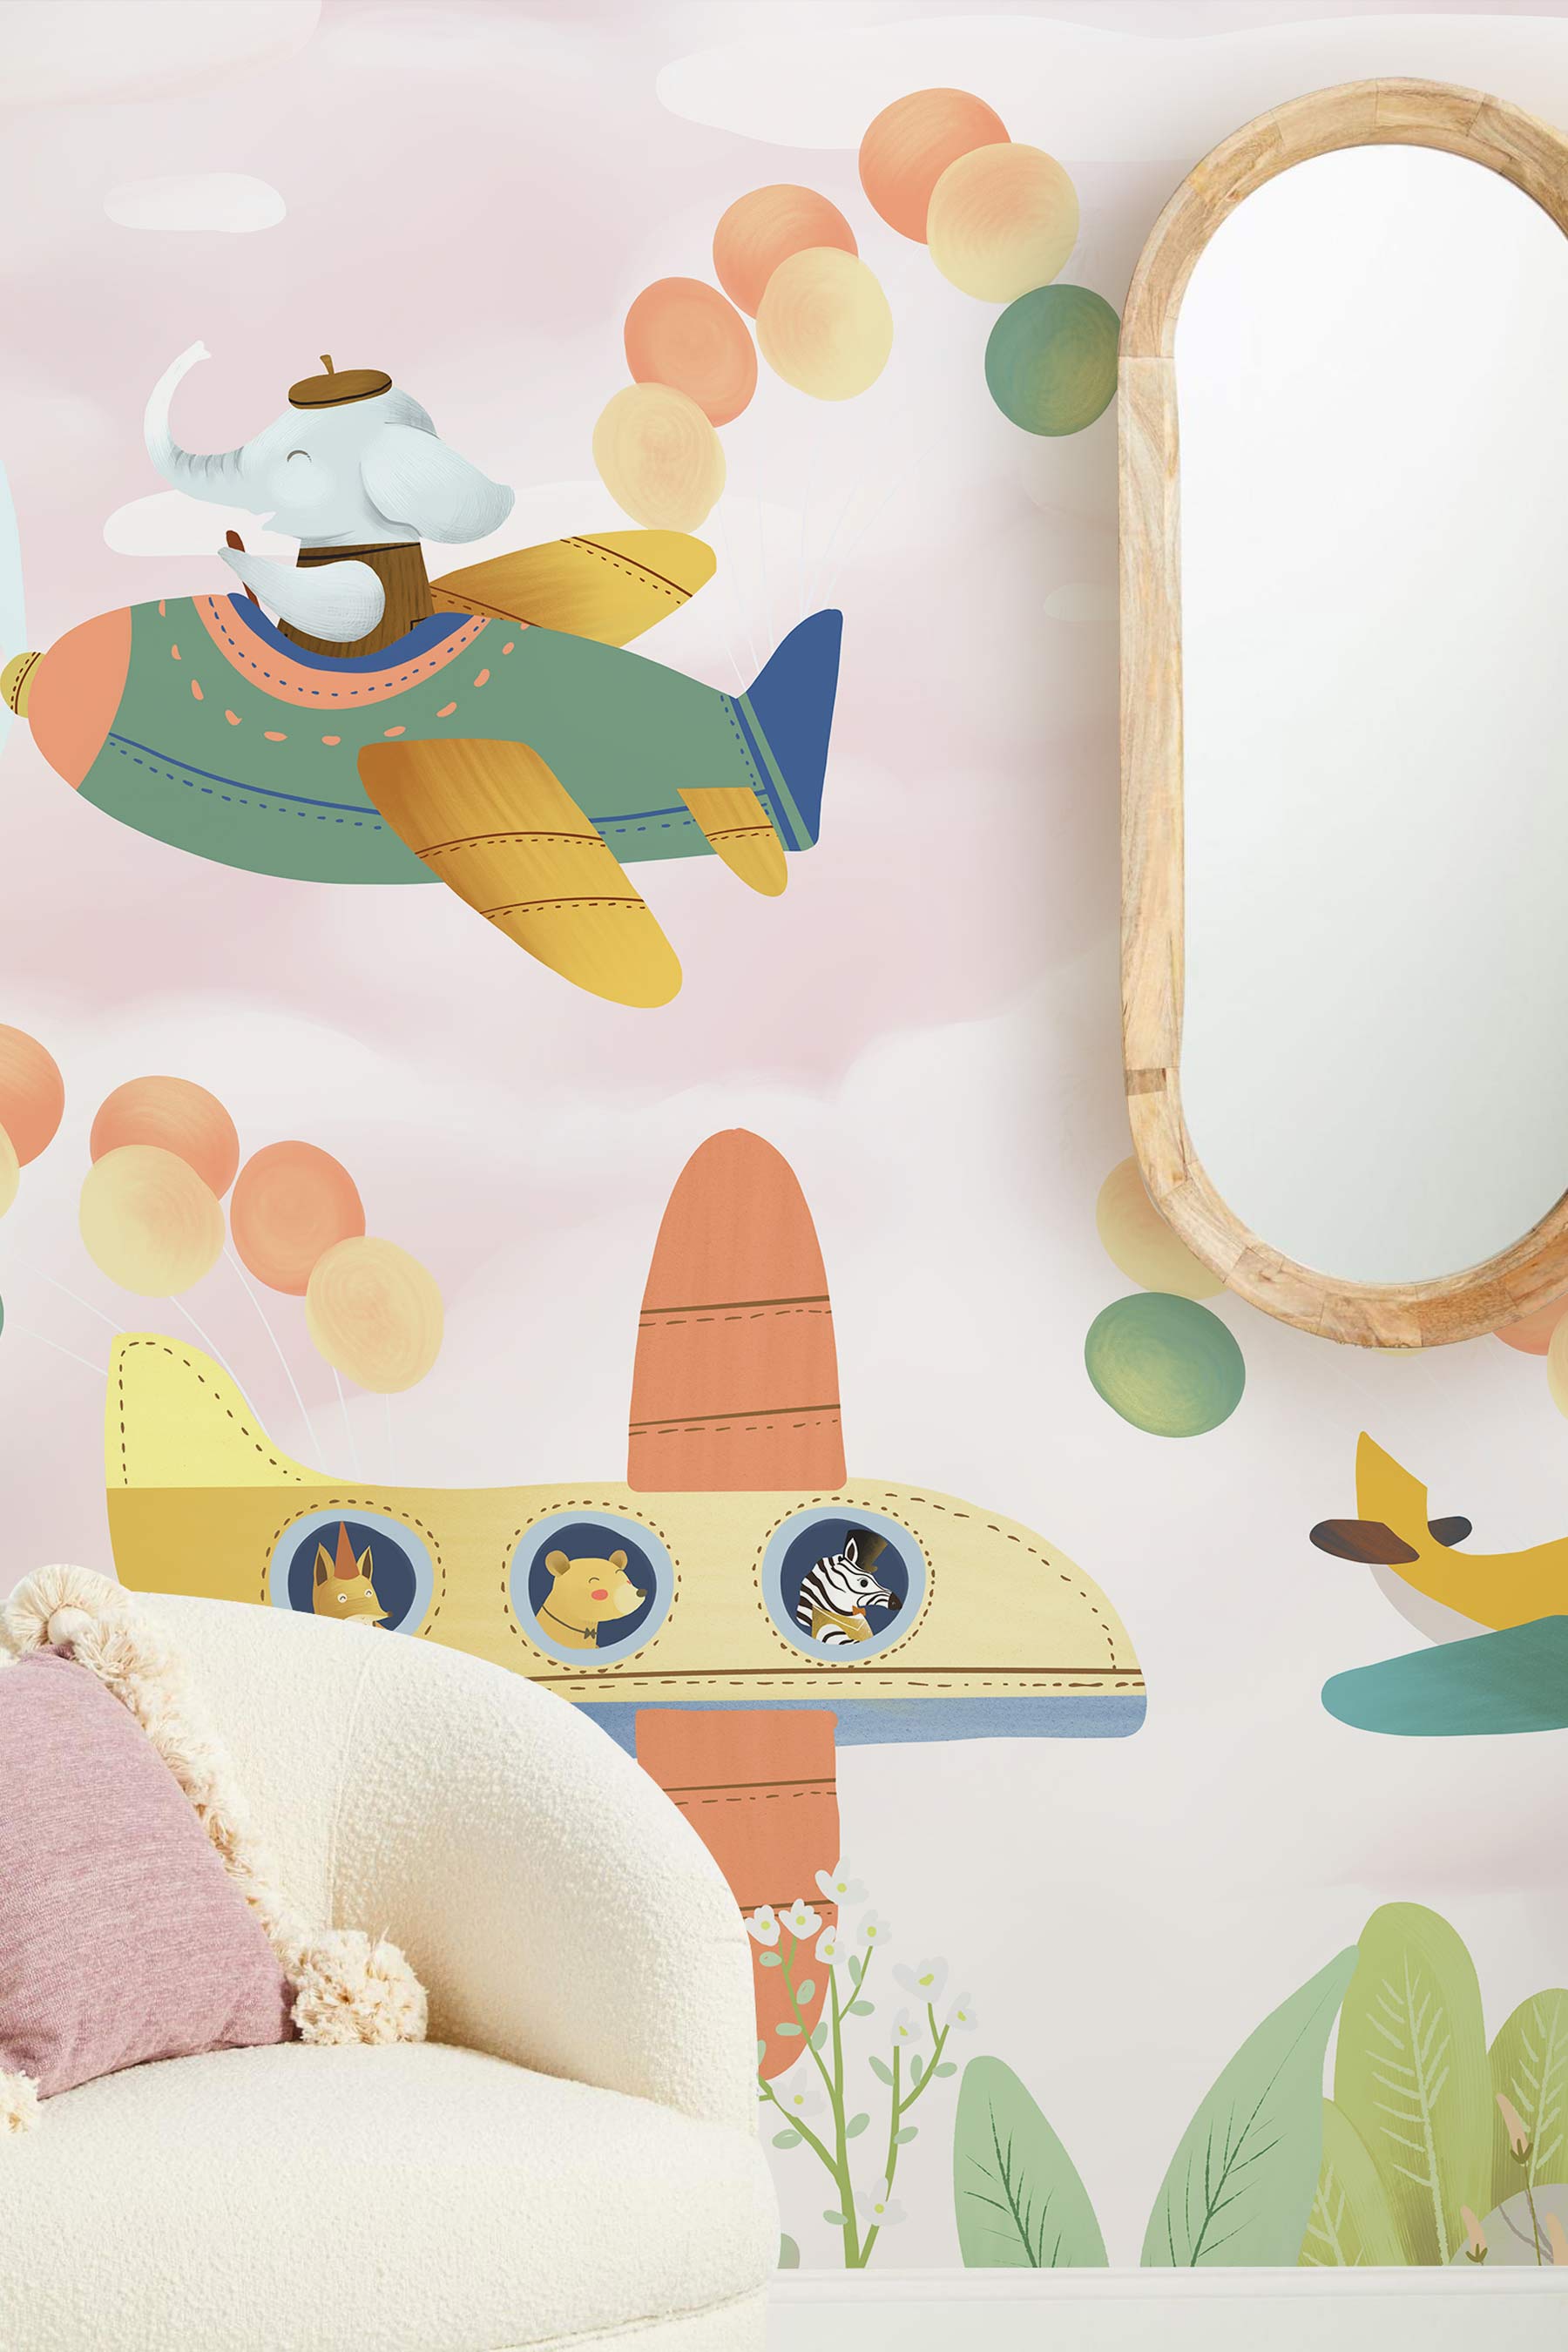 Animals Flying Airplanes on a Cartoon Planes Wall Mural for Hallway Decorations